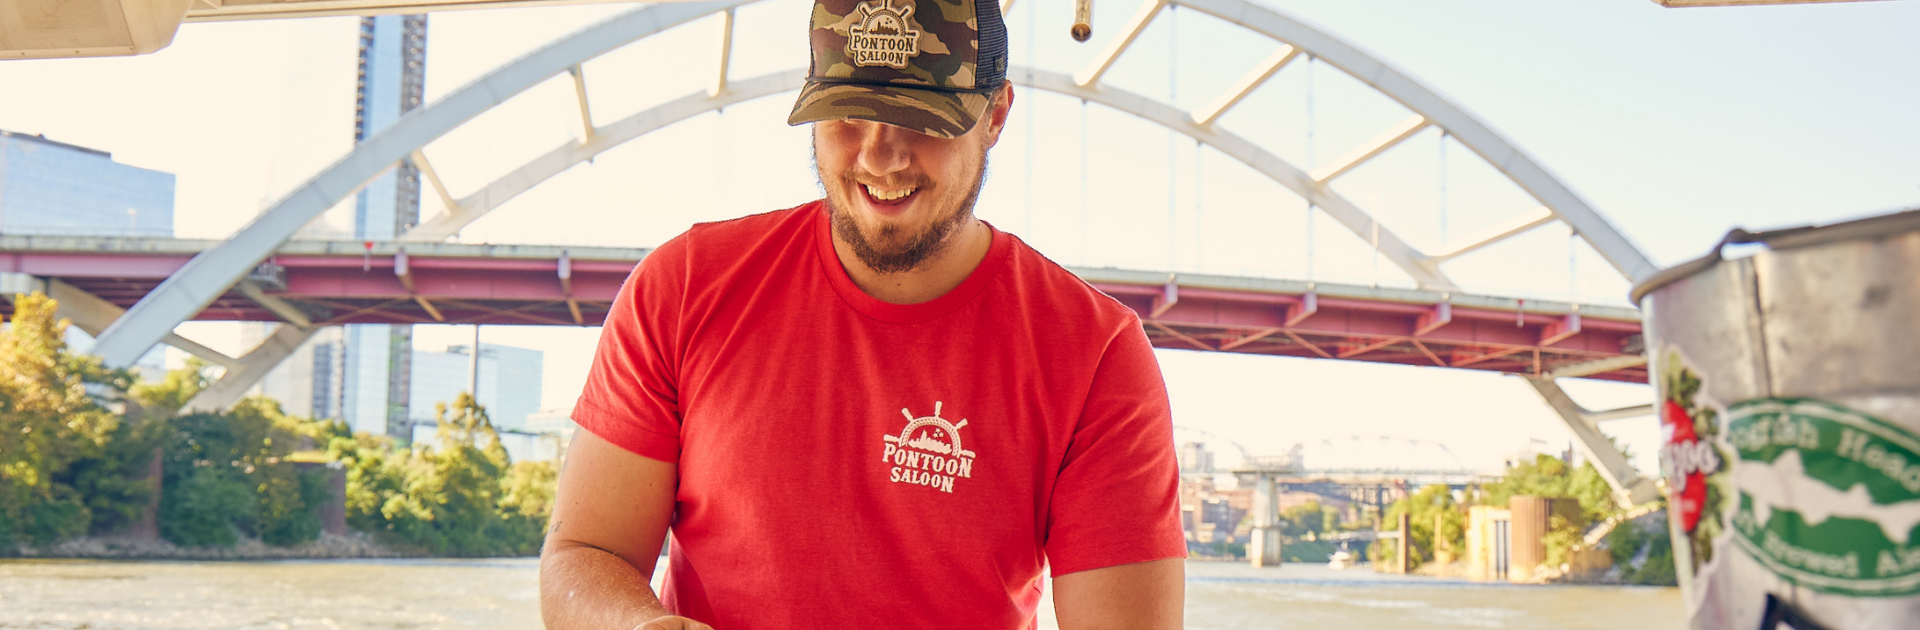 deckhand in a red shirt smiling with bridge behind him